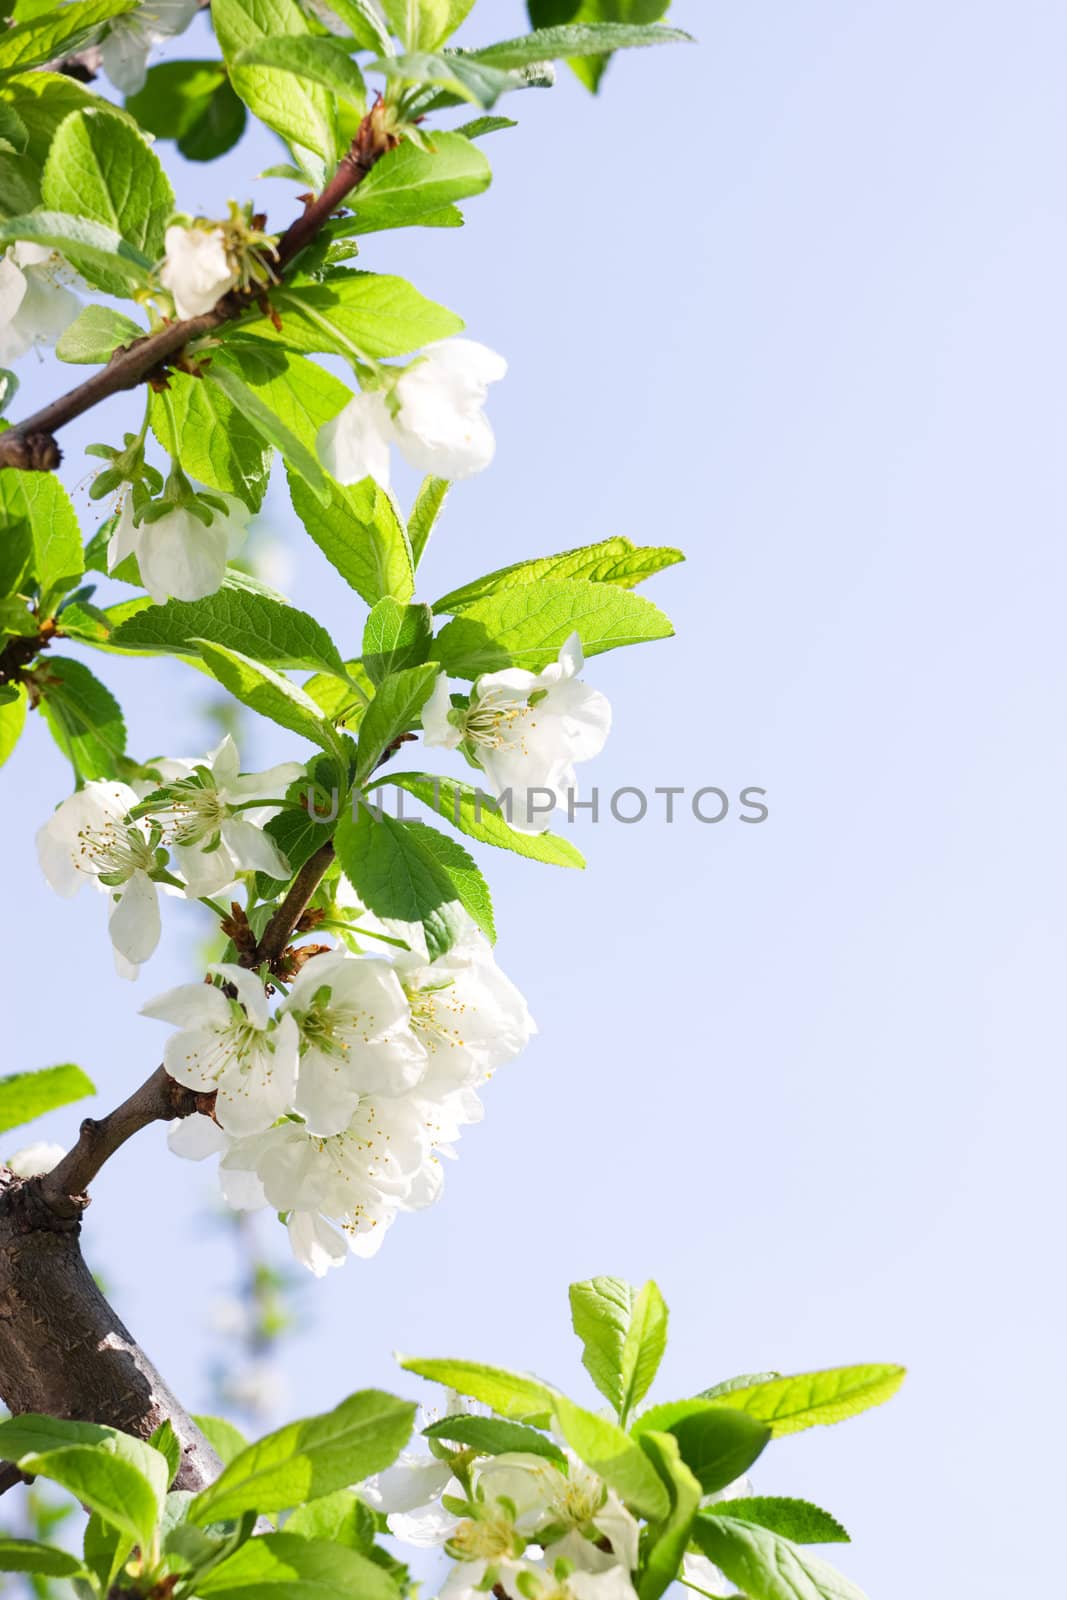 Spring Plum or Cherry leaves and blossom over sunny sky